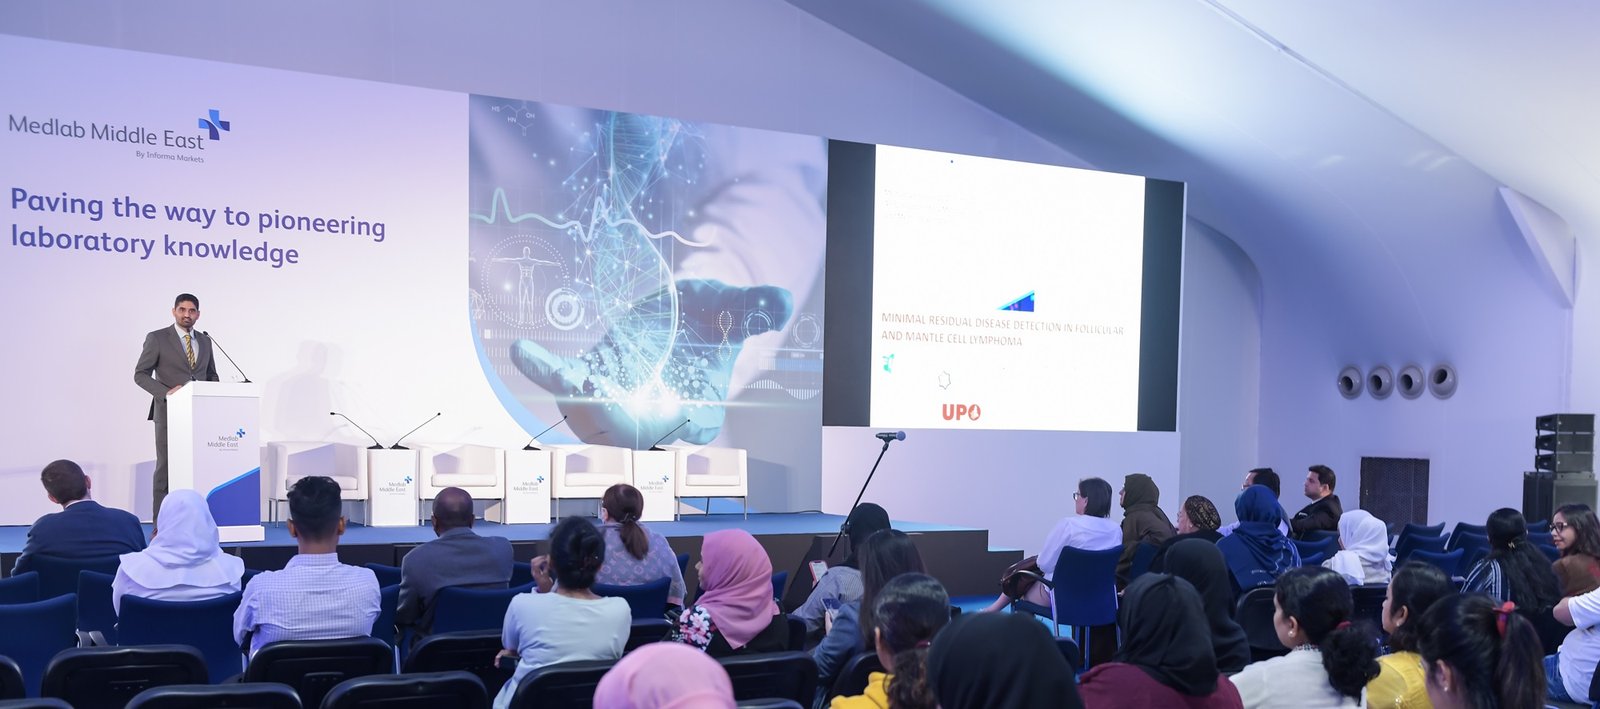 Global experts  gathered at Medlab Middle East to highlight the importance of sustainability in laboratories